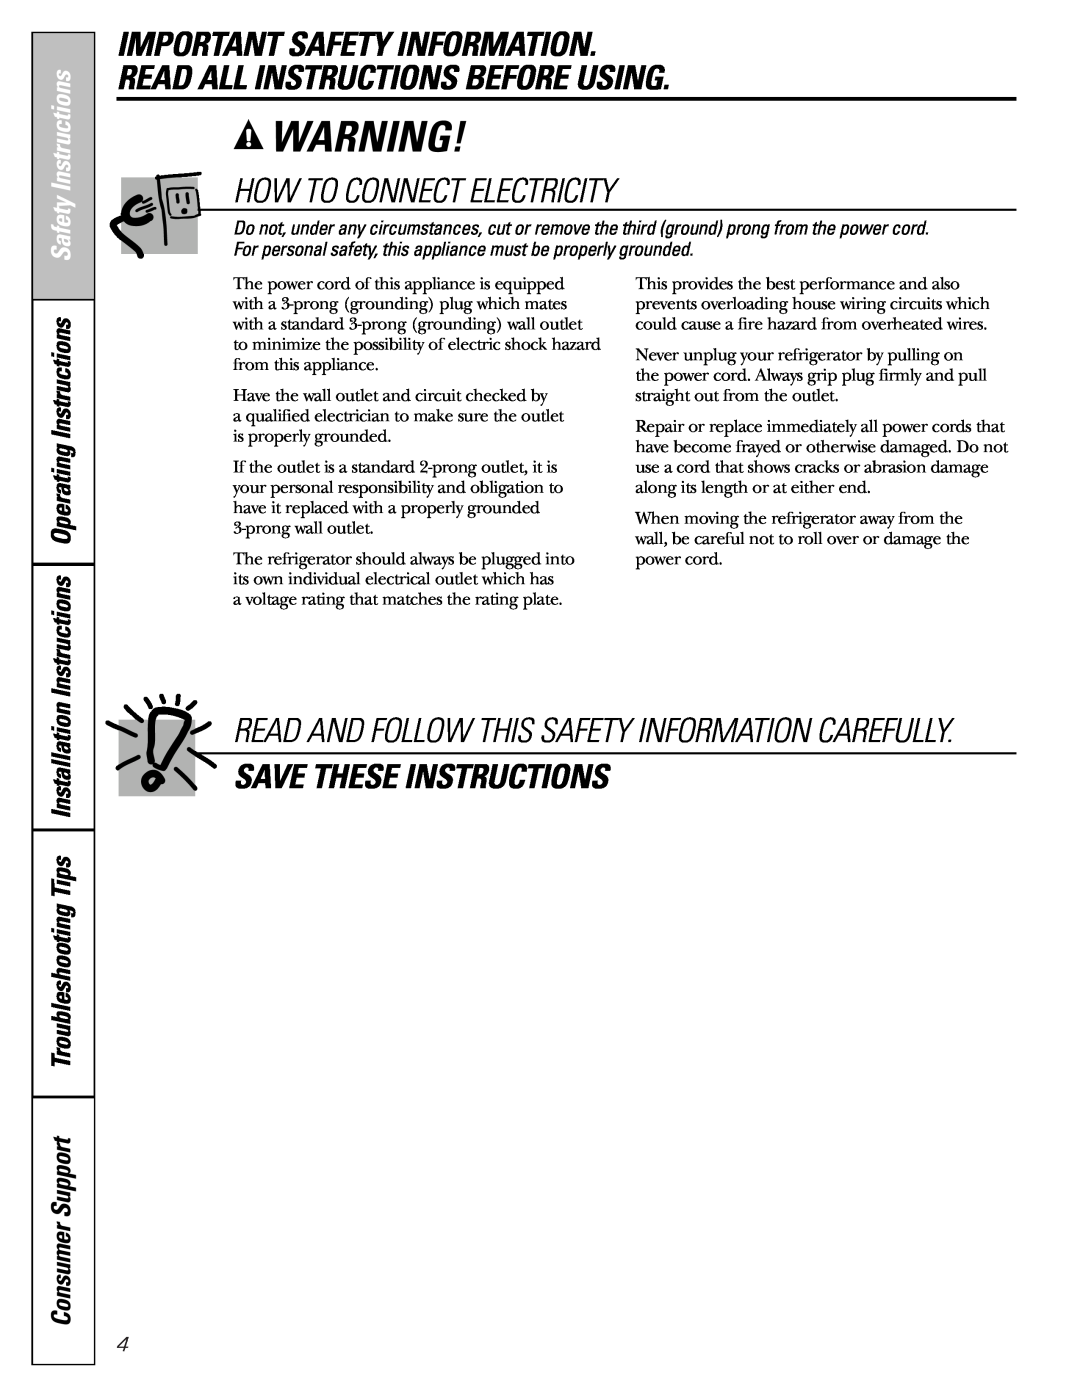 GE MODELS 23 AND 25 How To Connect Electricity, Save These Instructions, Instructions Operating Instructions 